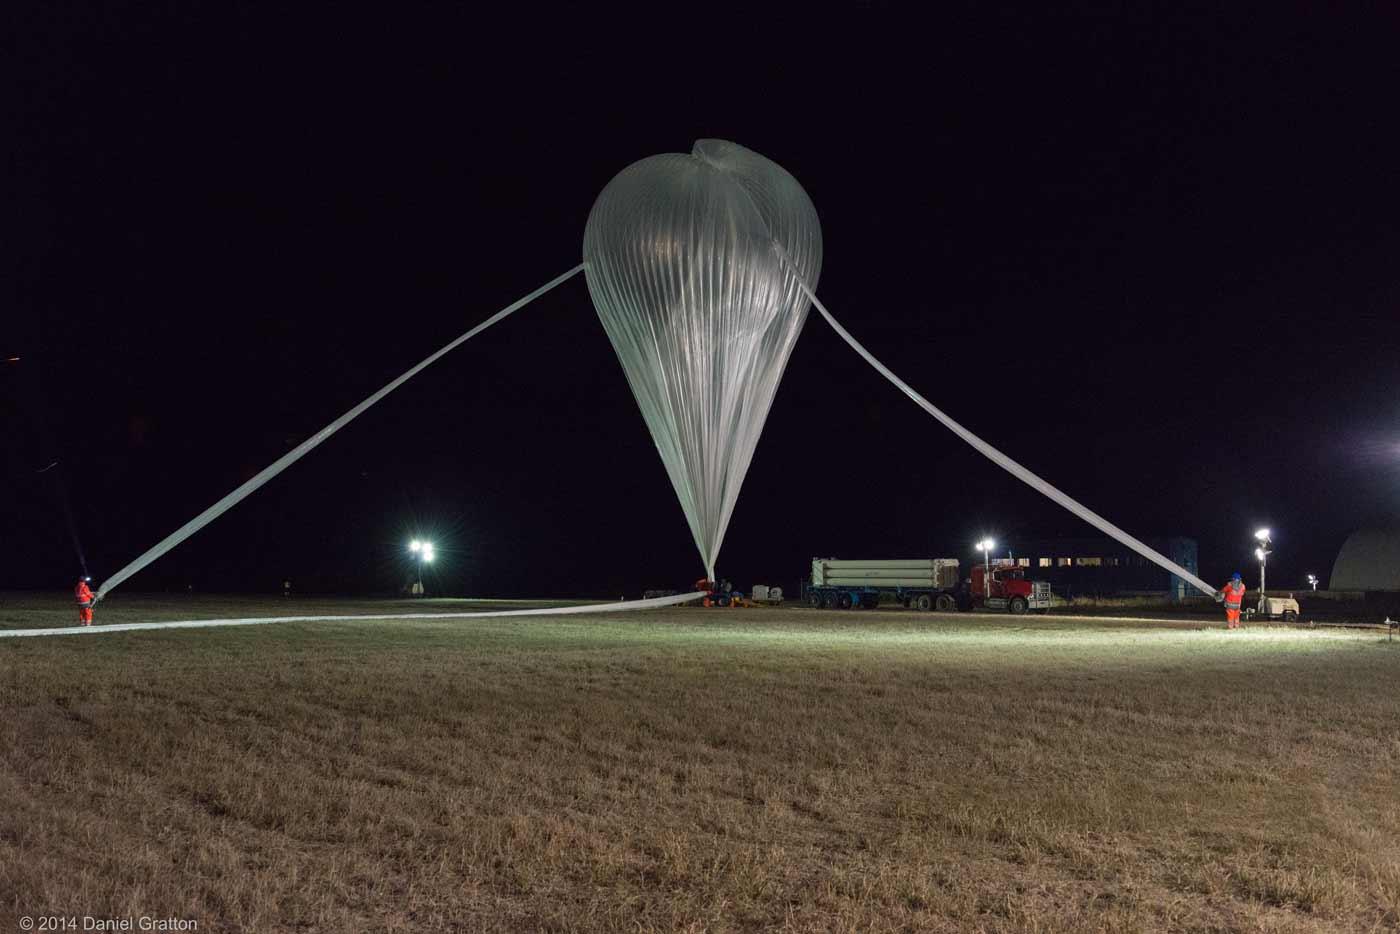 HiCIBaS Balloon, Launched in 2014